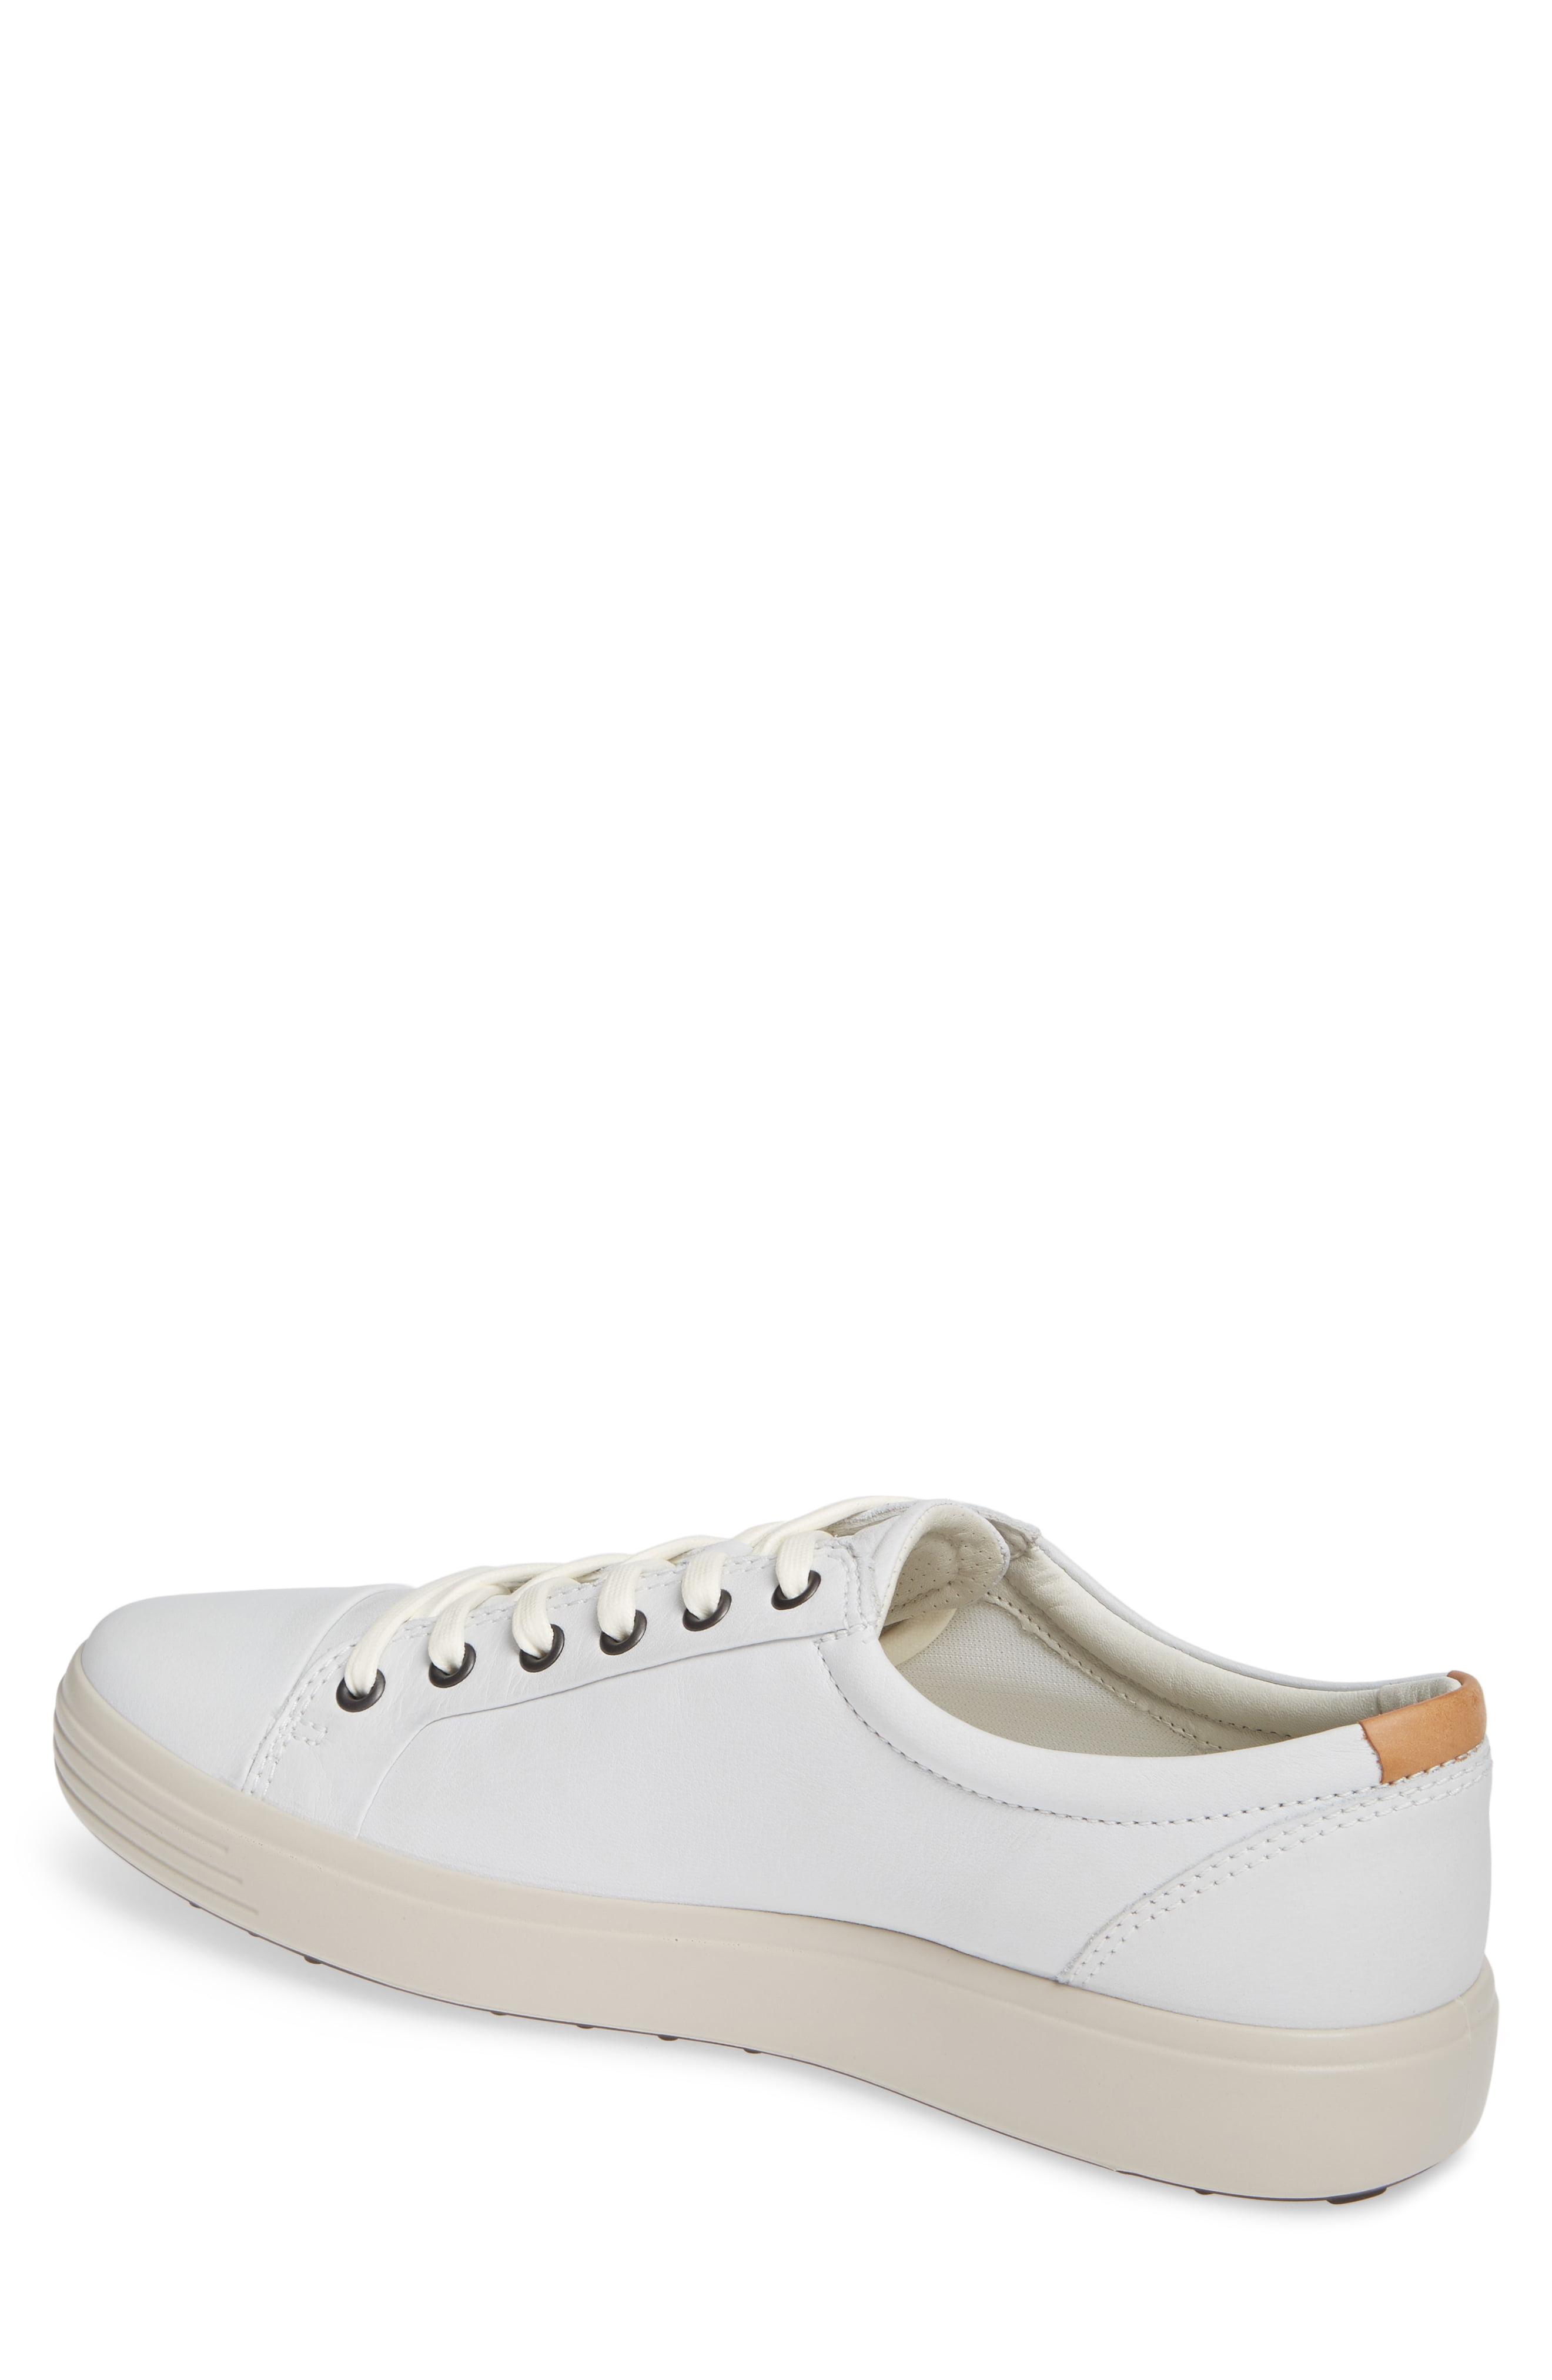 Ecco Soft Vii Lace-up Sneaker in White for Men - Lyst